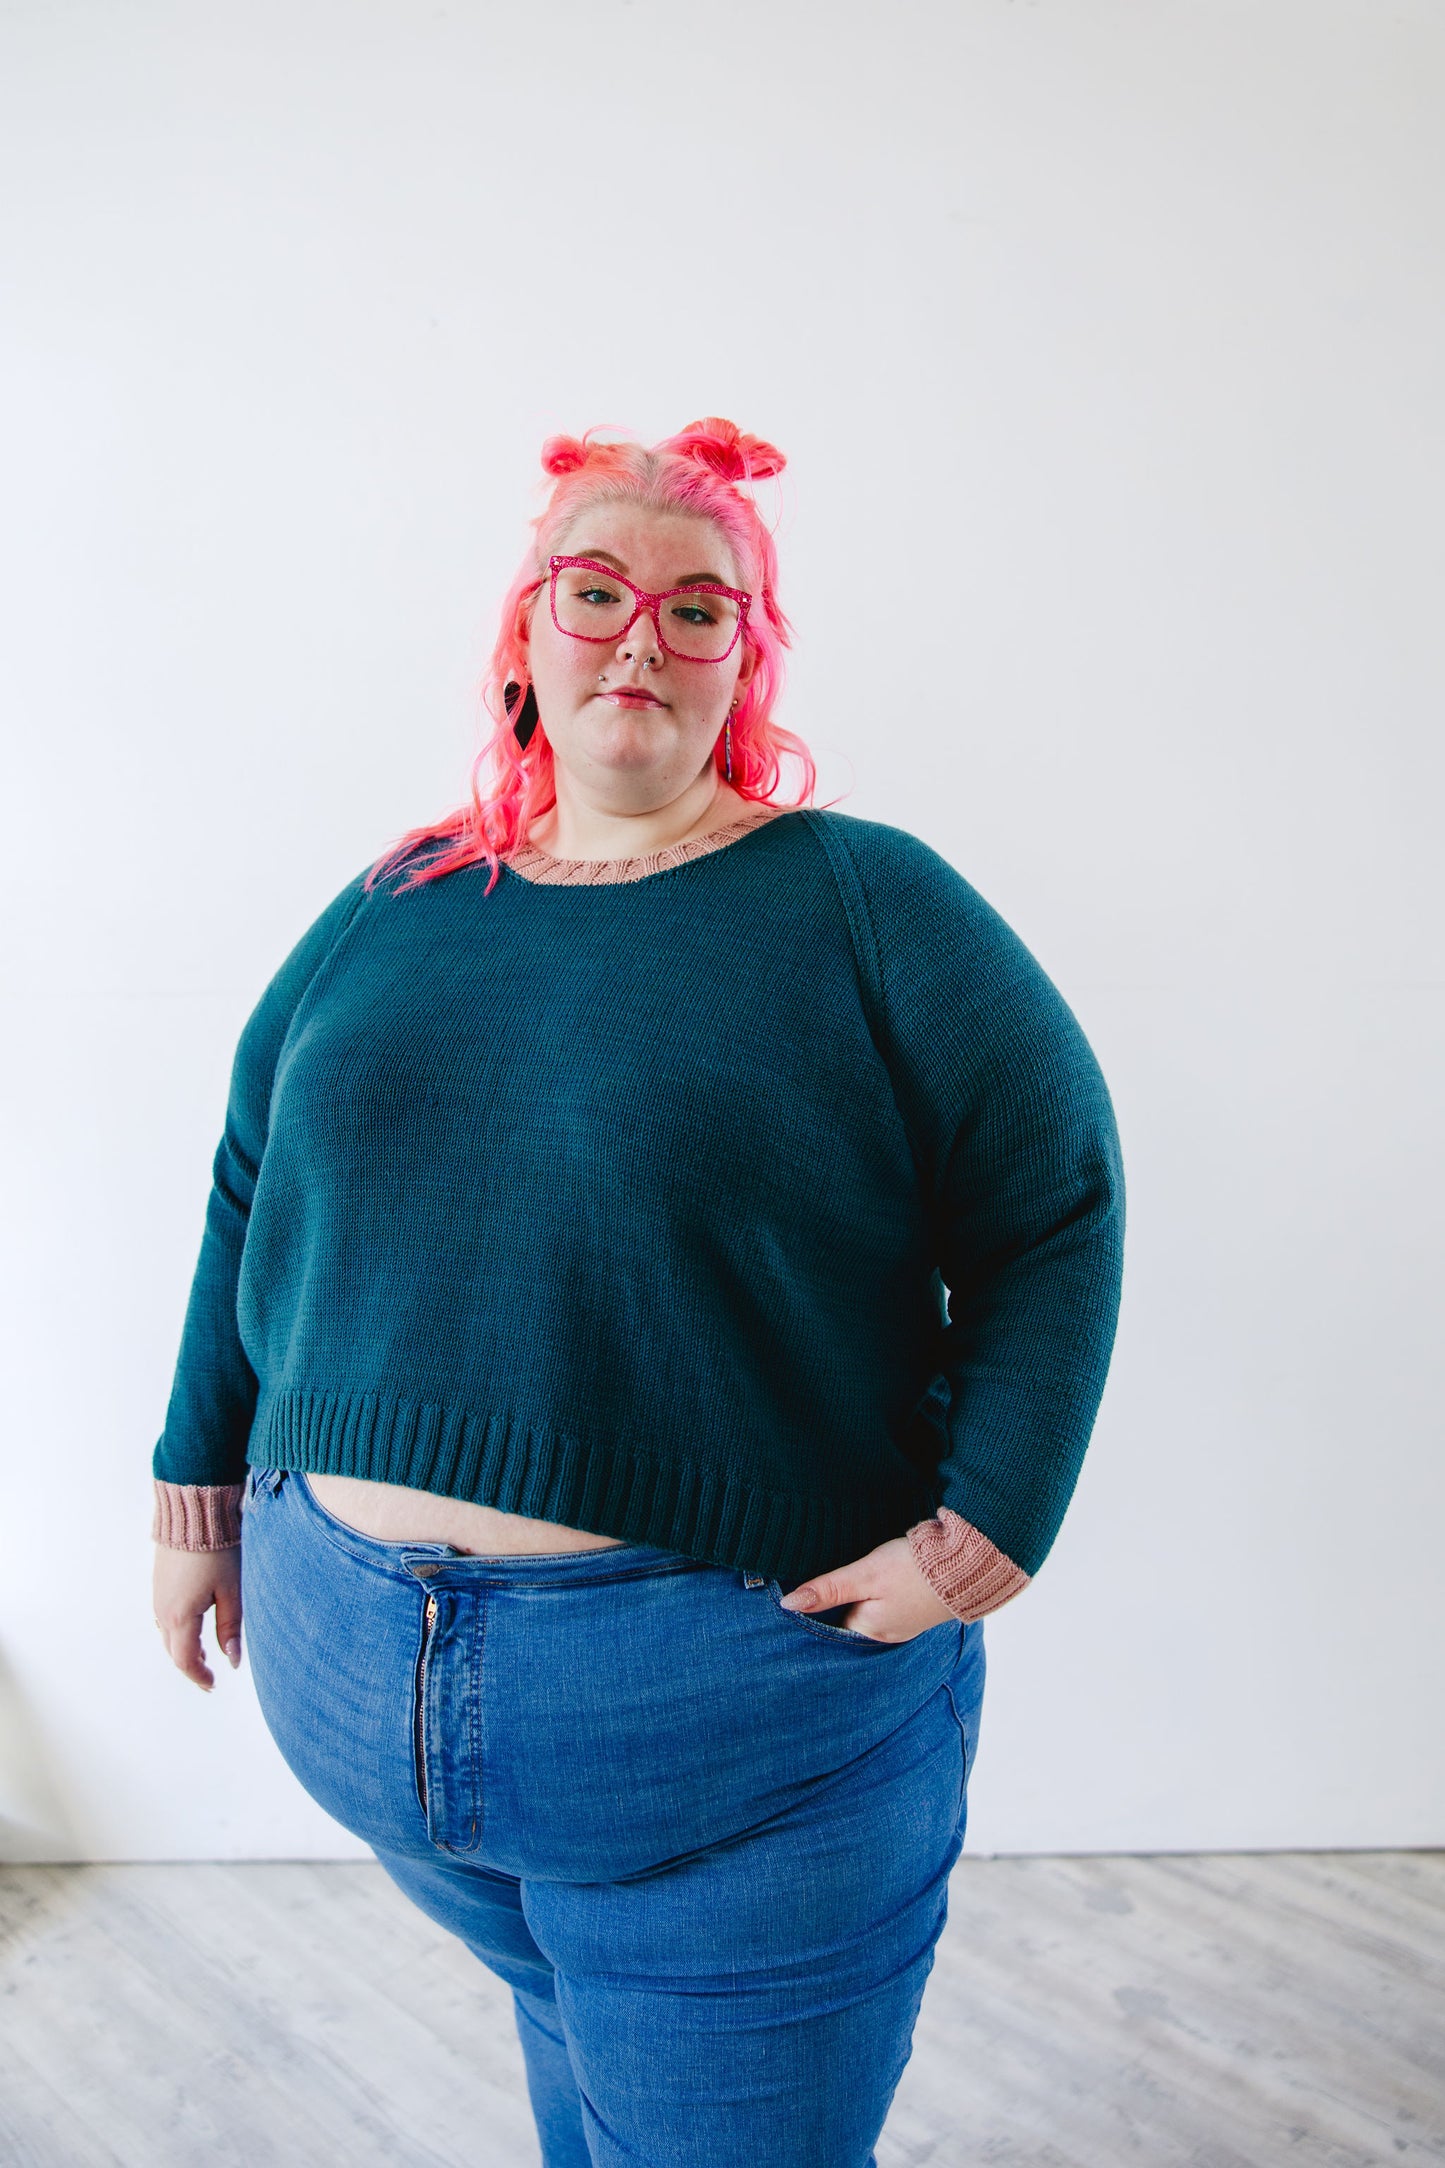 Courtney stands, looking at the camera, wearing a teal sweater knit with pink accents at the cuffs and neckband. Her pink glasses match her pink hair.